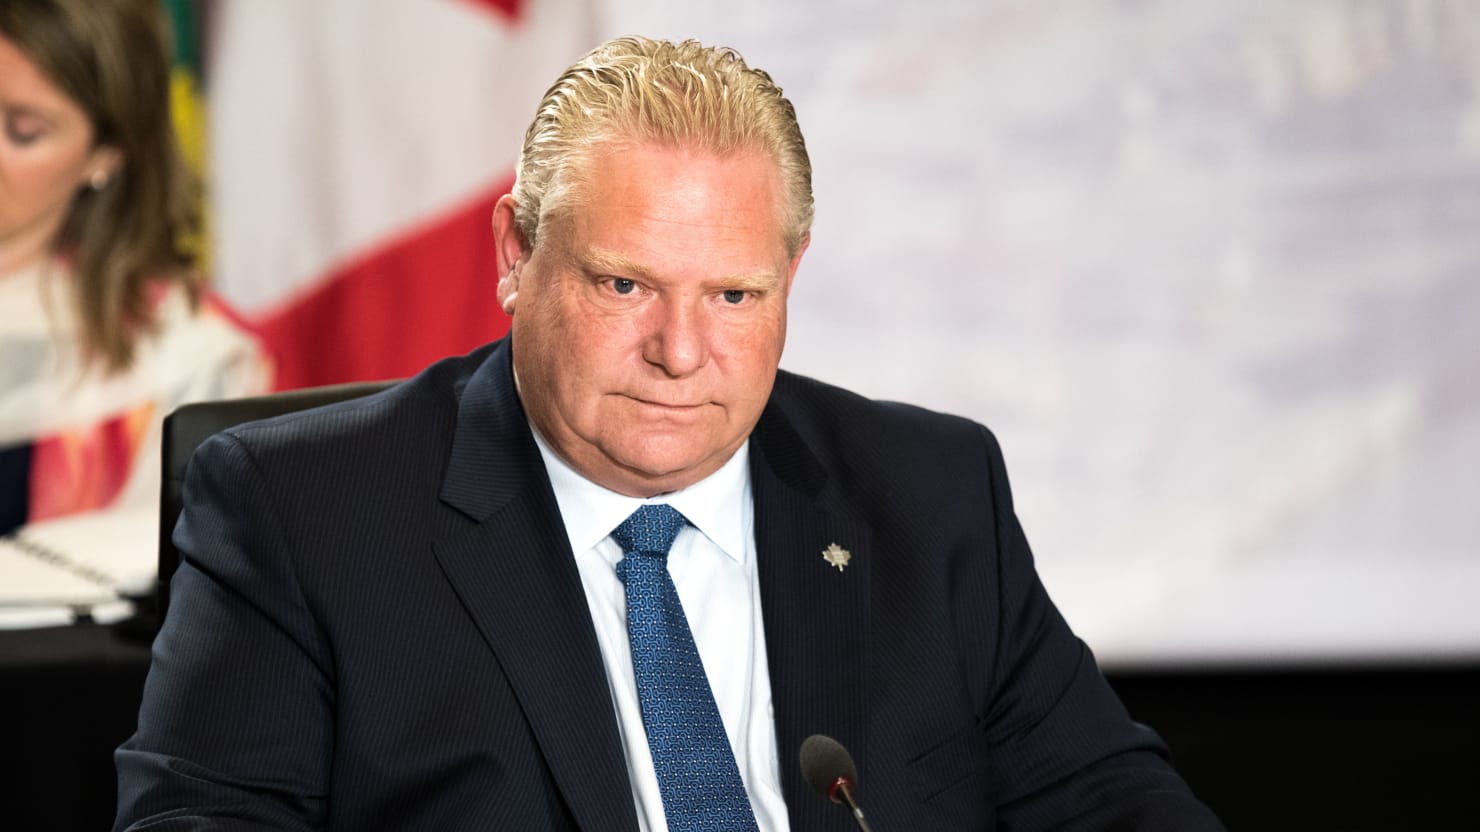 Ontario Premier Doug Ford admits he knew about his finance minister’s ‘totally unacceptable’ holiday